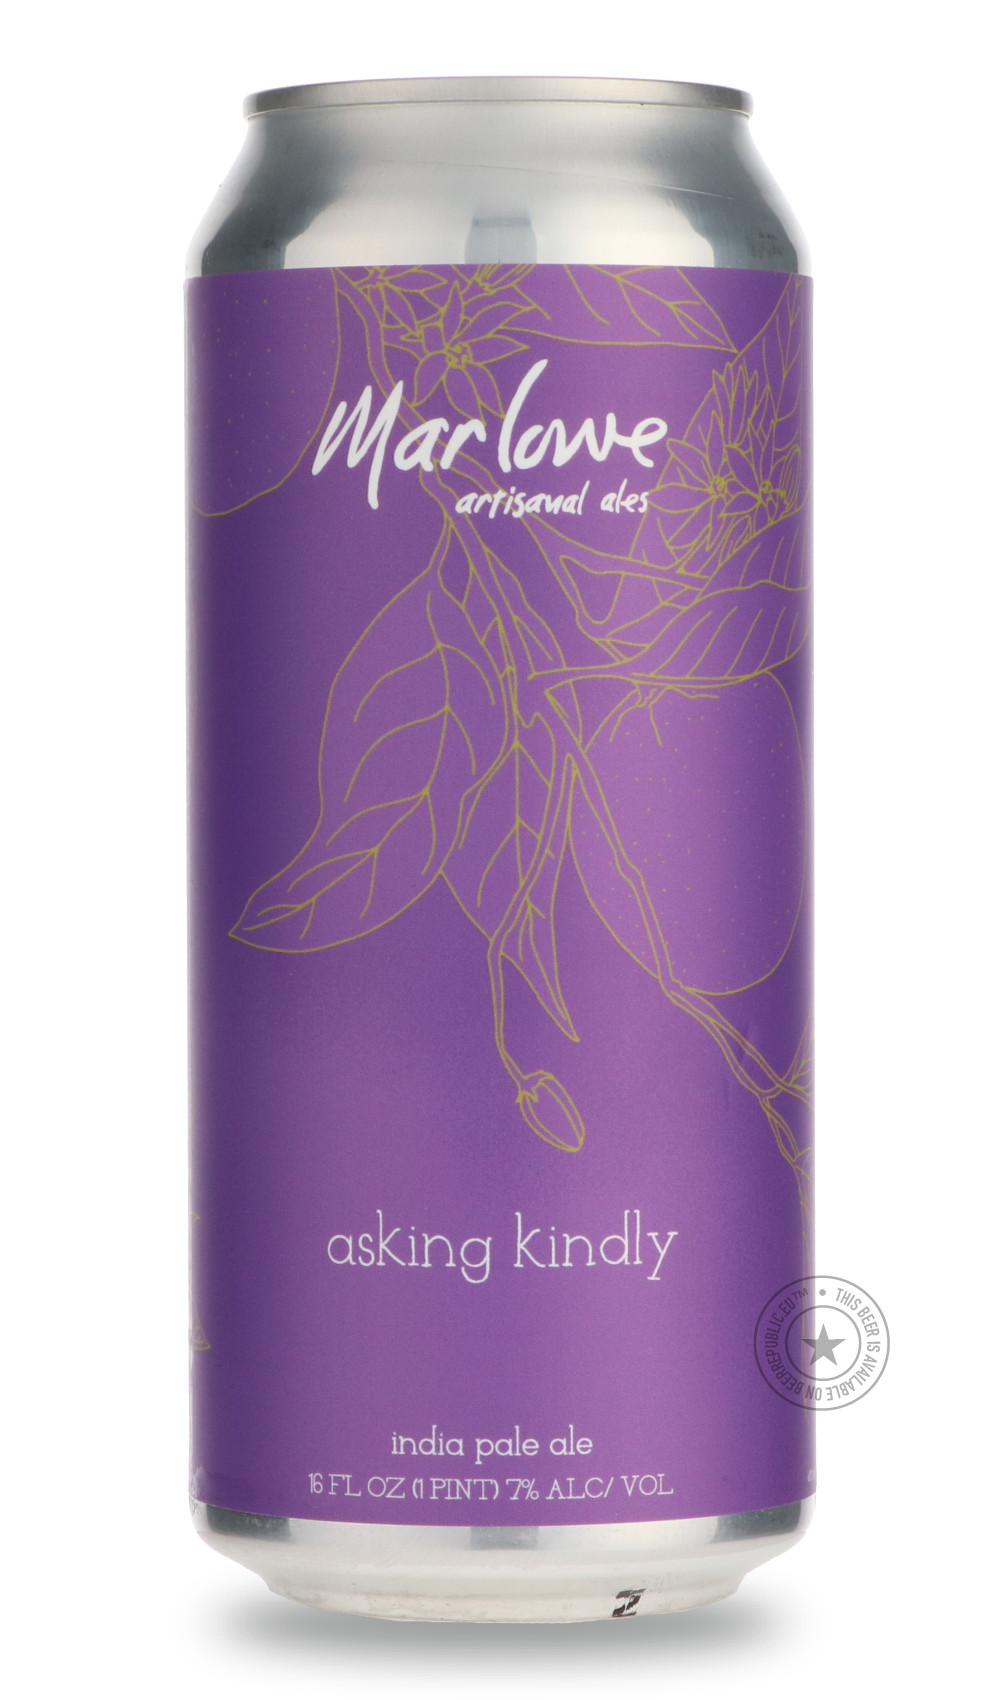 -Marlowe- Asking Kindly Feat. Vista (Purple)-IPA- Only @ Beer Republic - The best online beer store for American & Canadian craft beer - Buy beer online from the USA and Canada - Bier online kopen - Amerikaans bier kopen - Craft beer store - Craft beer kopen - Amerikanisch bier kaufen - Bier online kaufen - Acheter biere online - IPA - Stout - Porter - New England IPA - Hazy IPA - Imperial Stout - Barrel Aged - Barrel Aged Imperial Stout - Brown - Dark beer - Blond - Blonde - Pilsner - Lager - Wheat - Weize